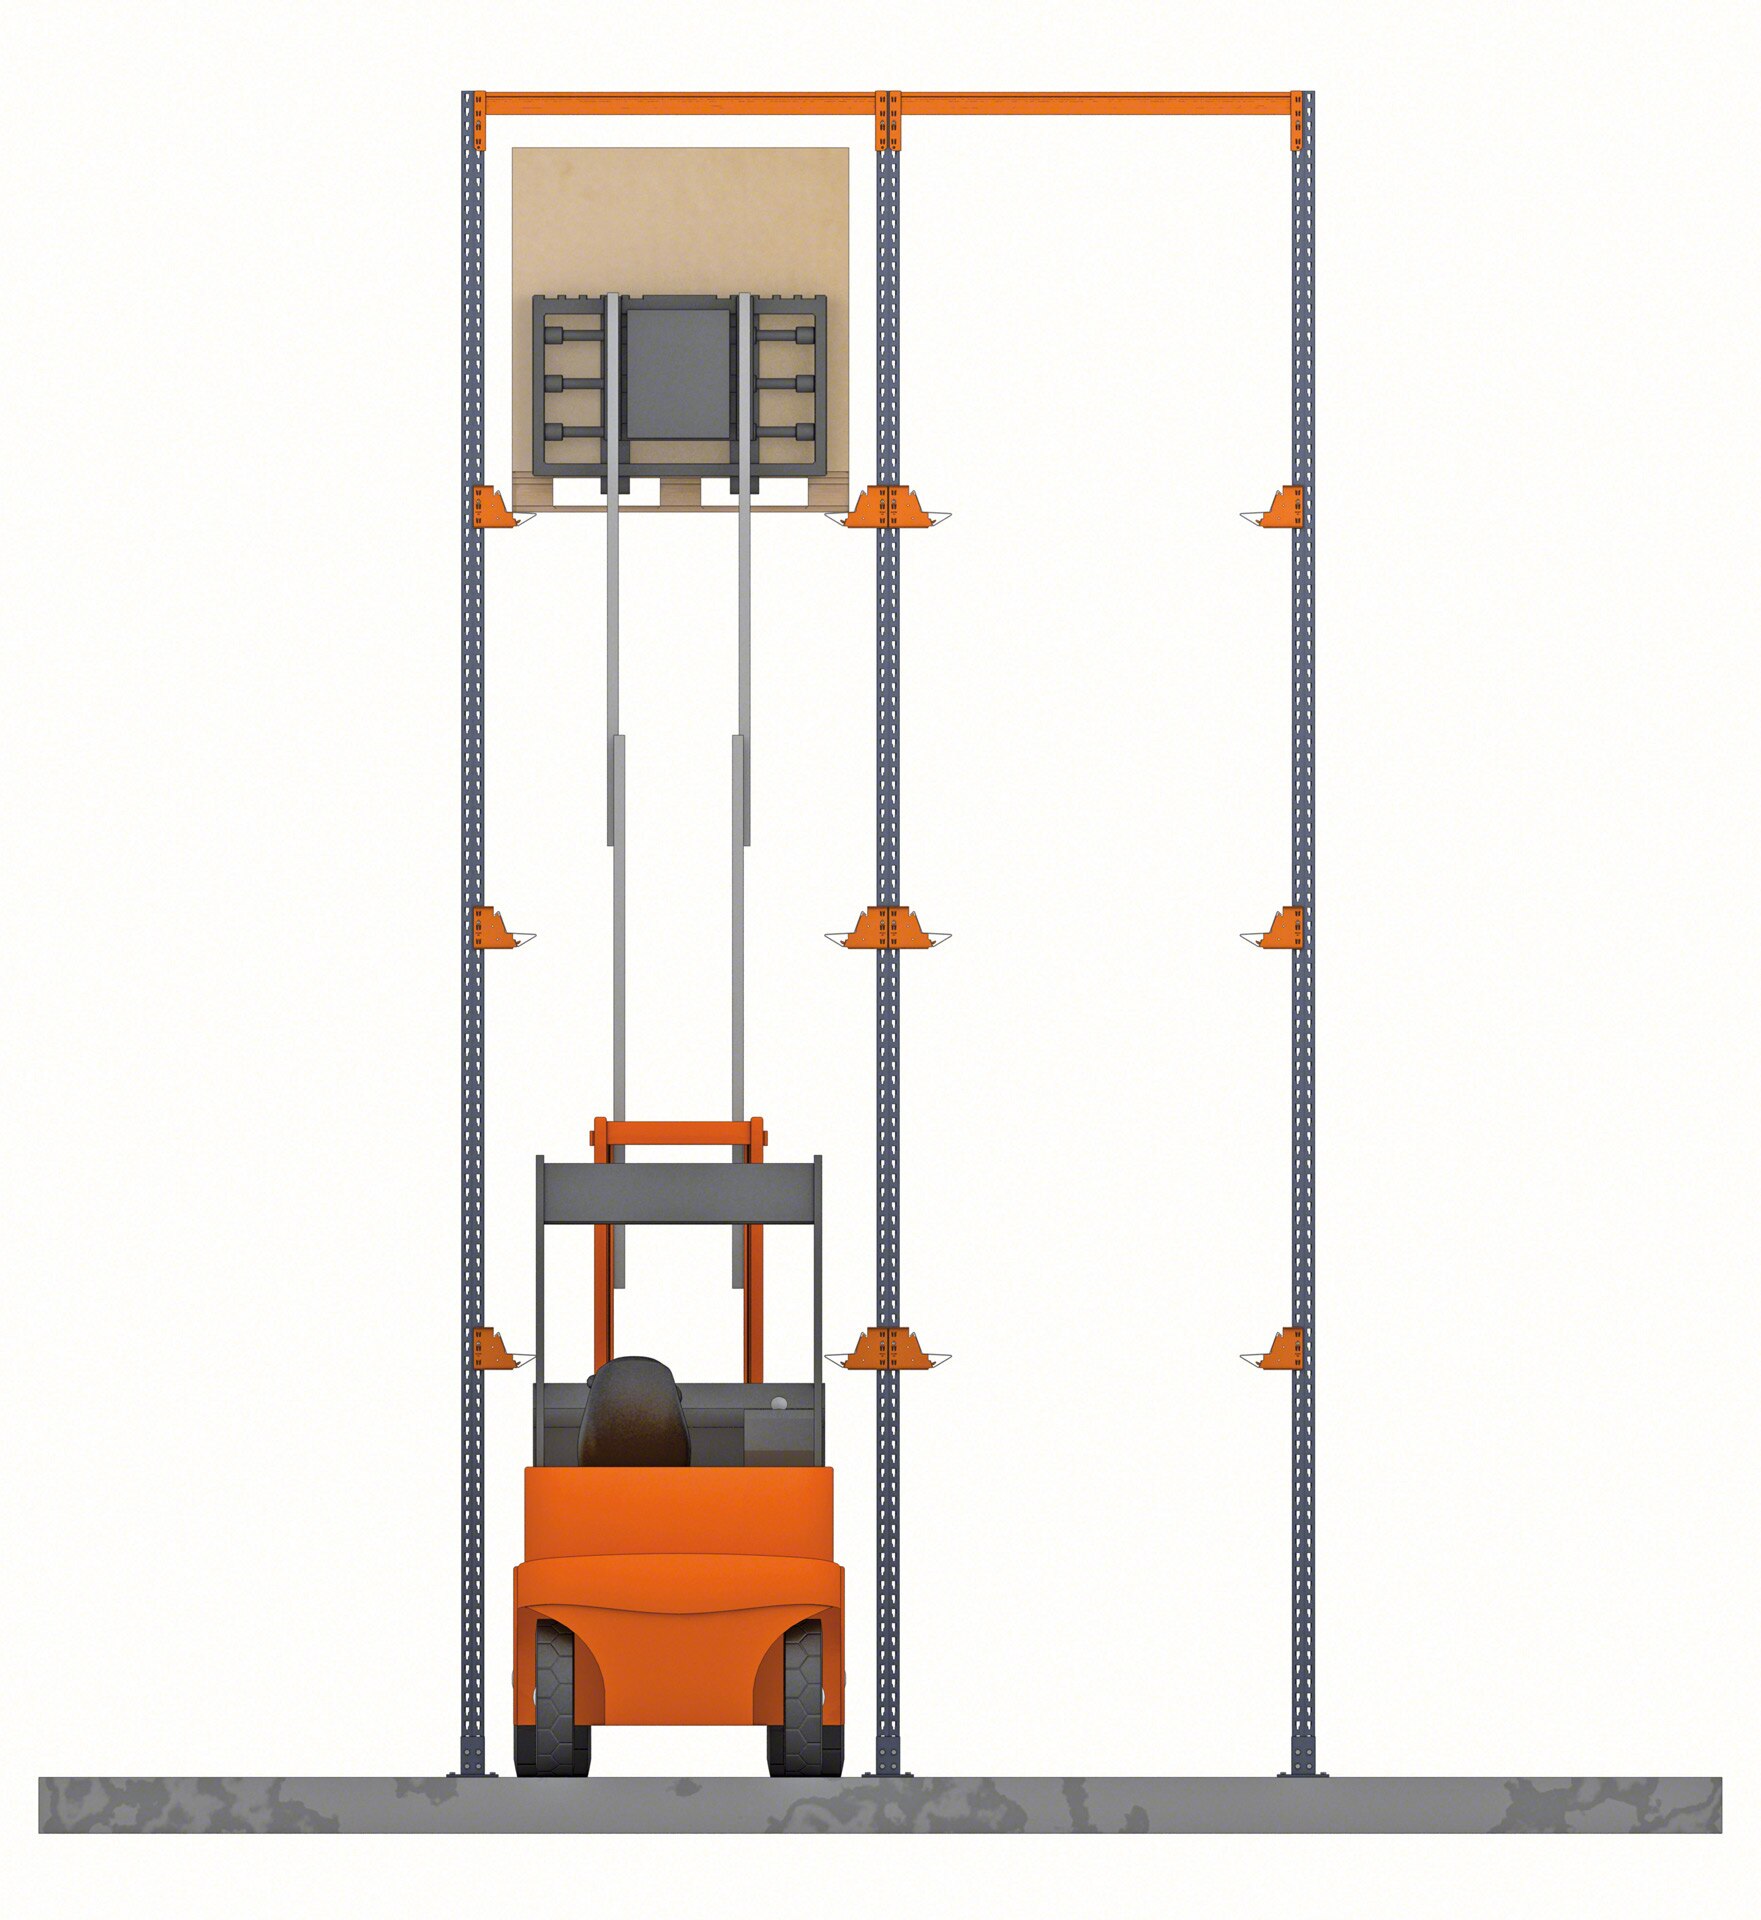 Forklifts circulate inside the aisles of drive-in racking